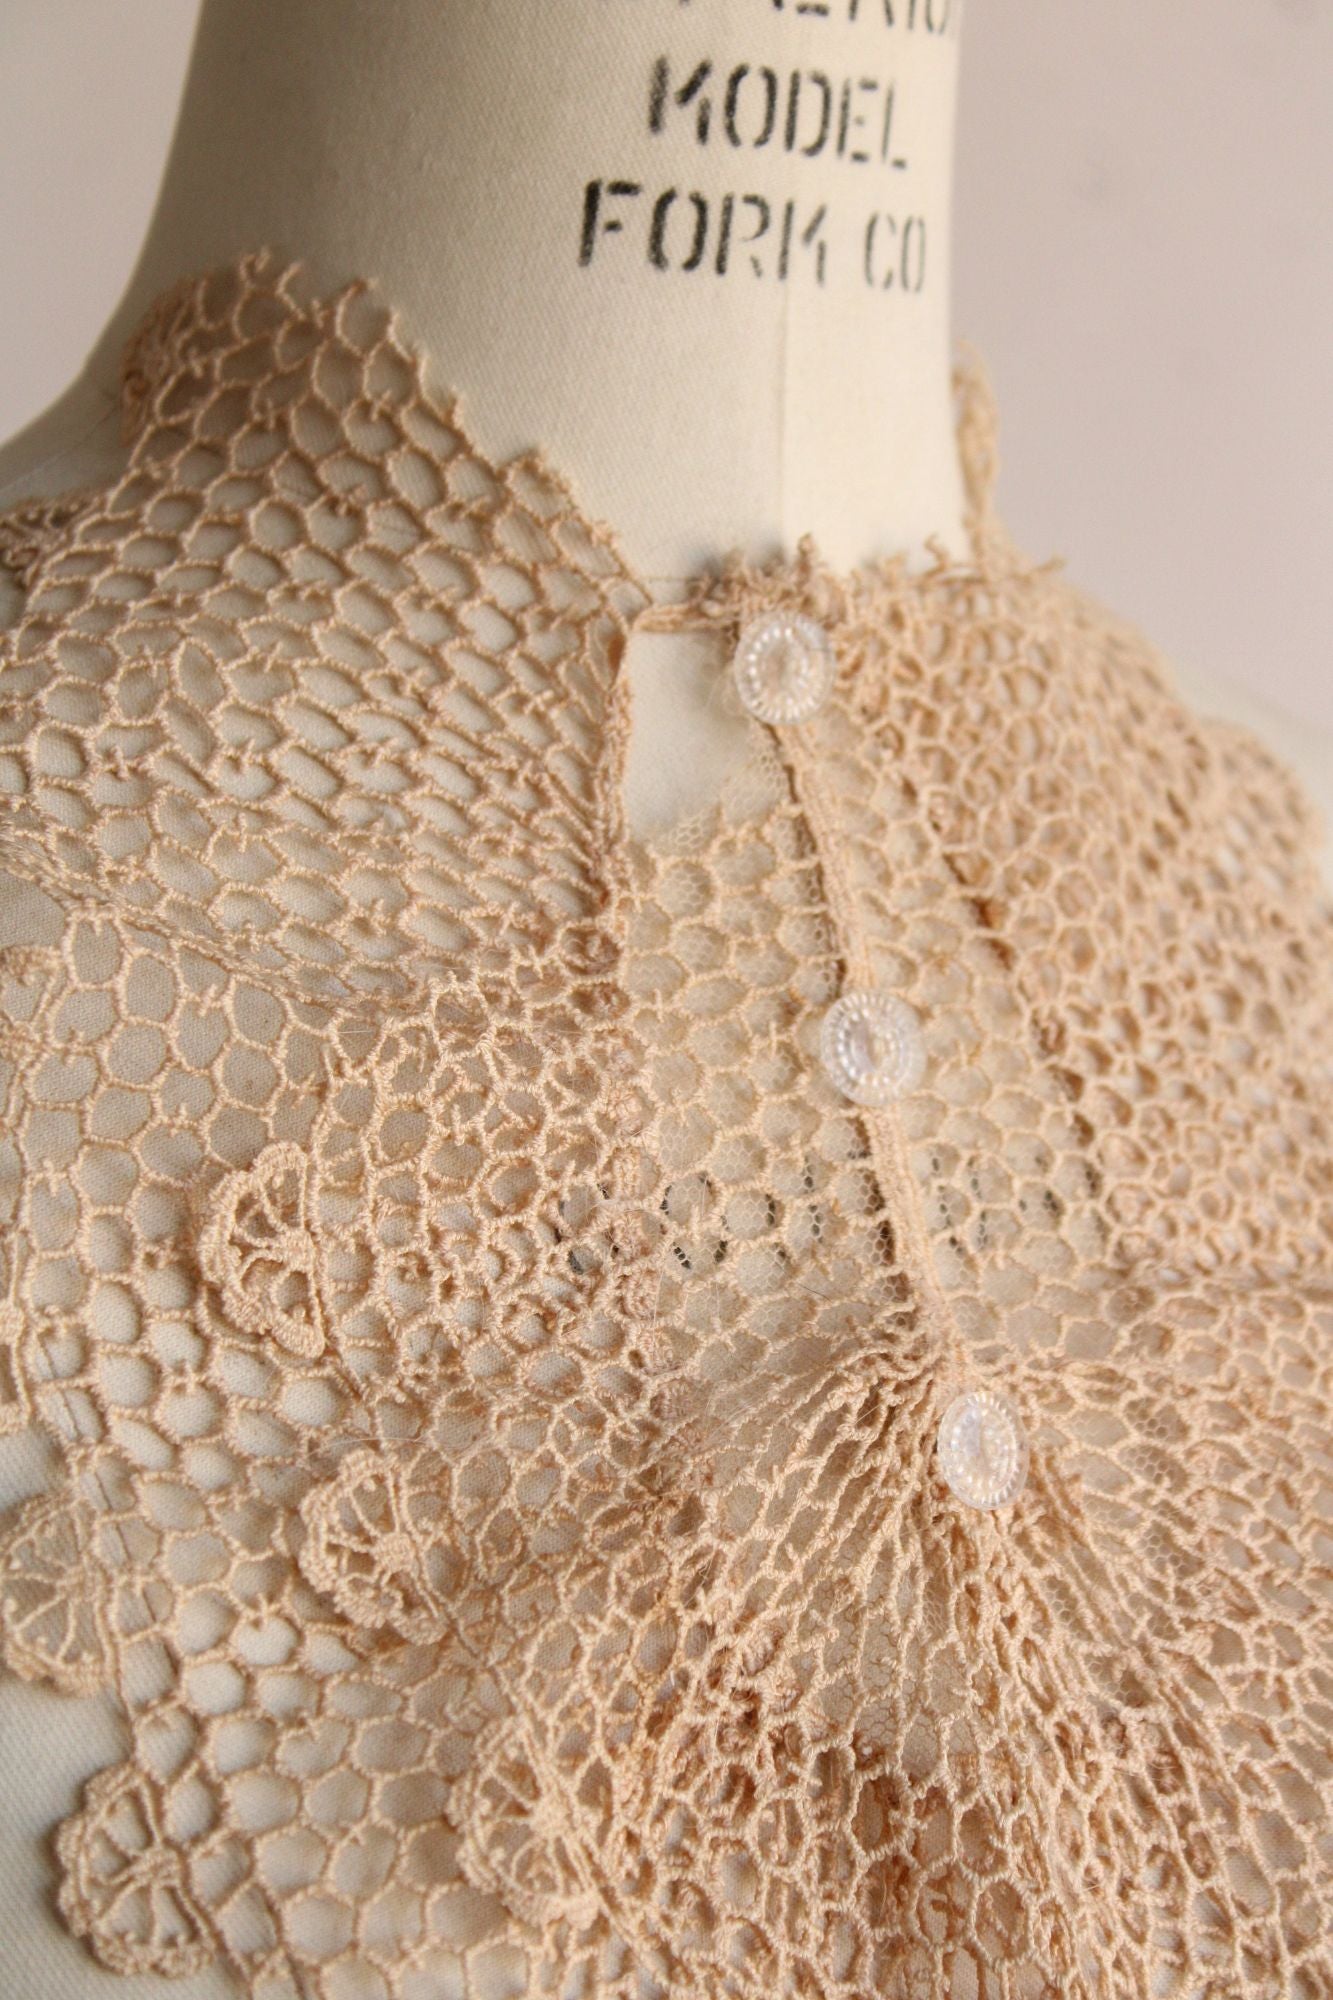 Vintage 1930s 1940s Lace Collar, Ivory or Beige Jabot with Buttons